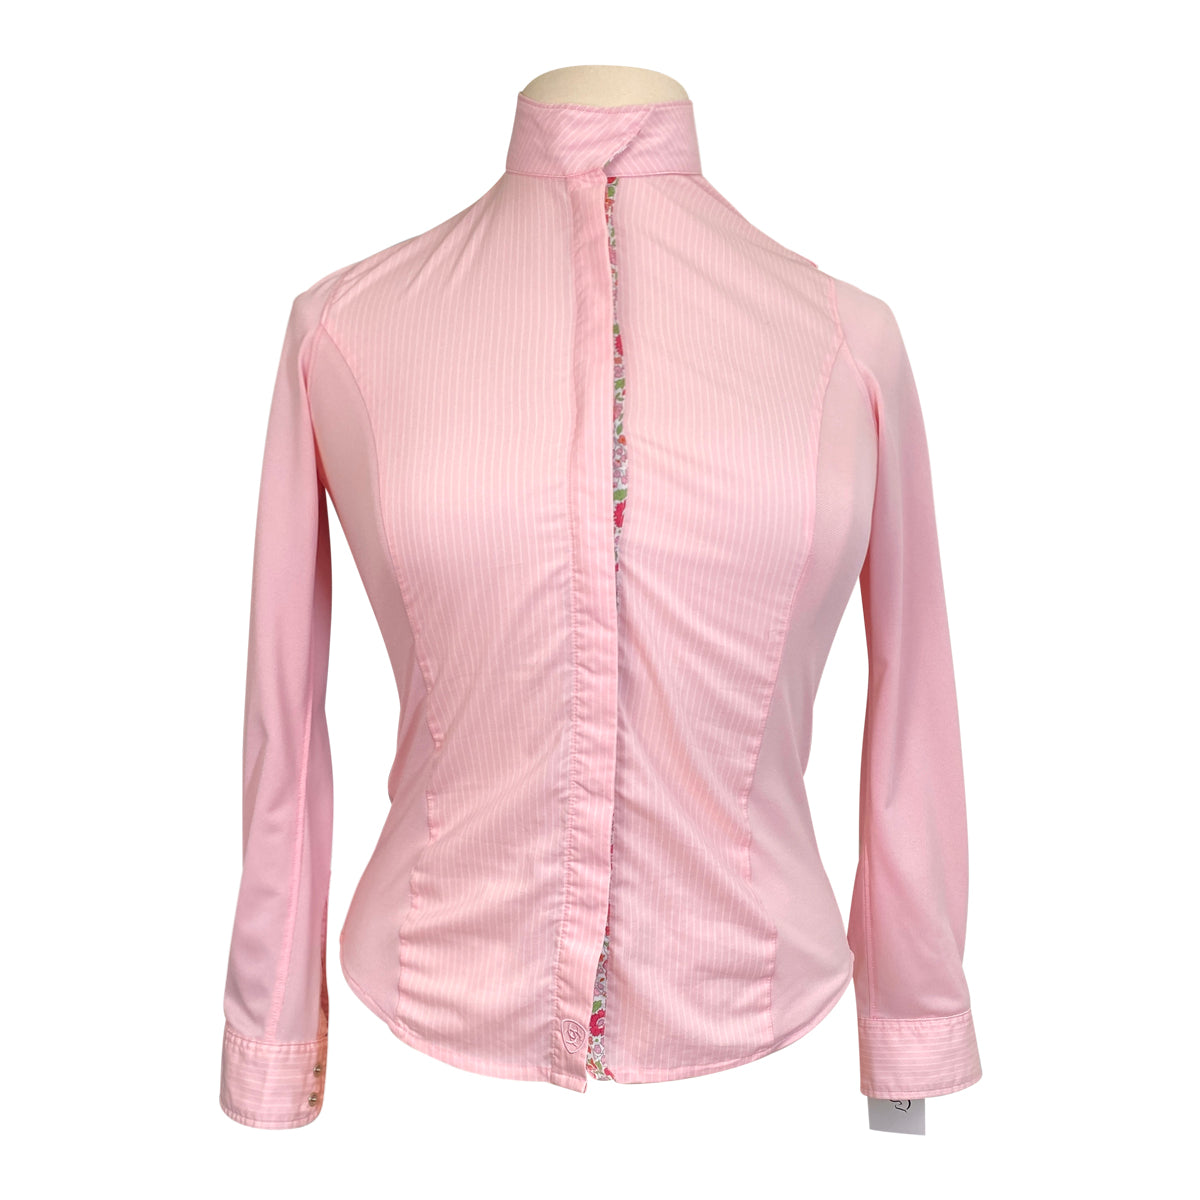 Ariat Pro Series Show Shirt in Pink w/Floral Pattern